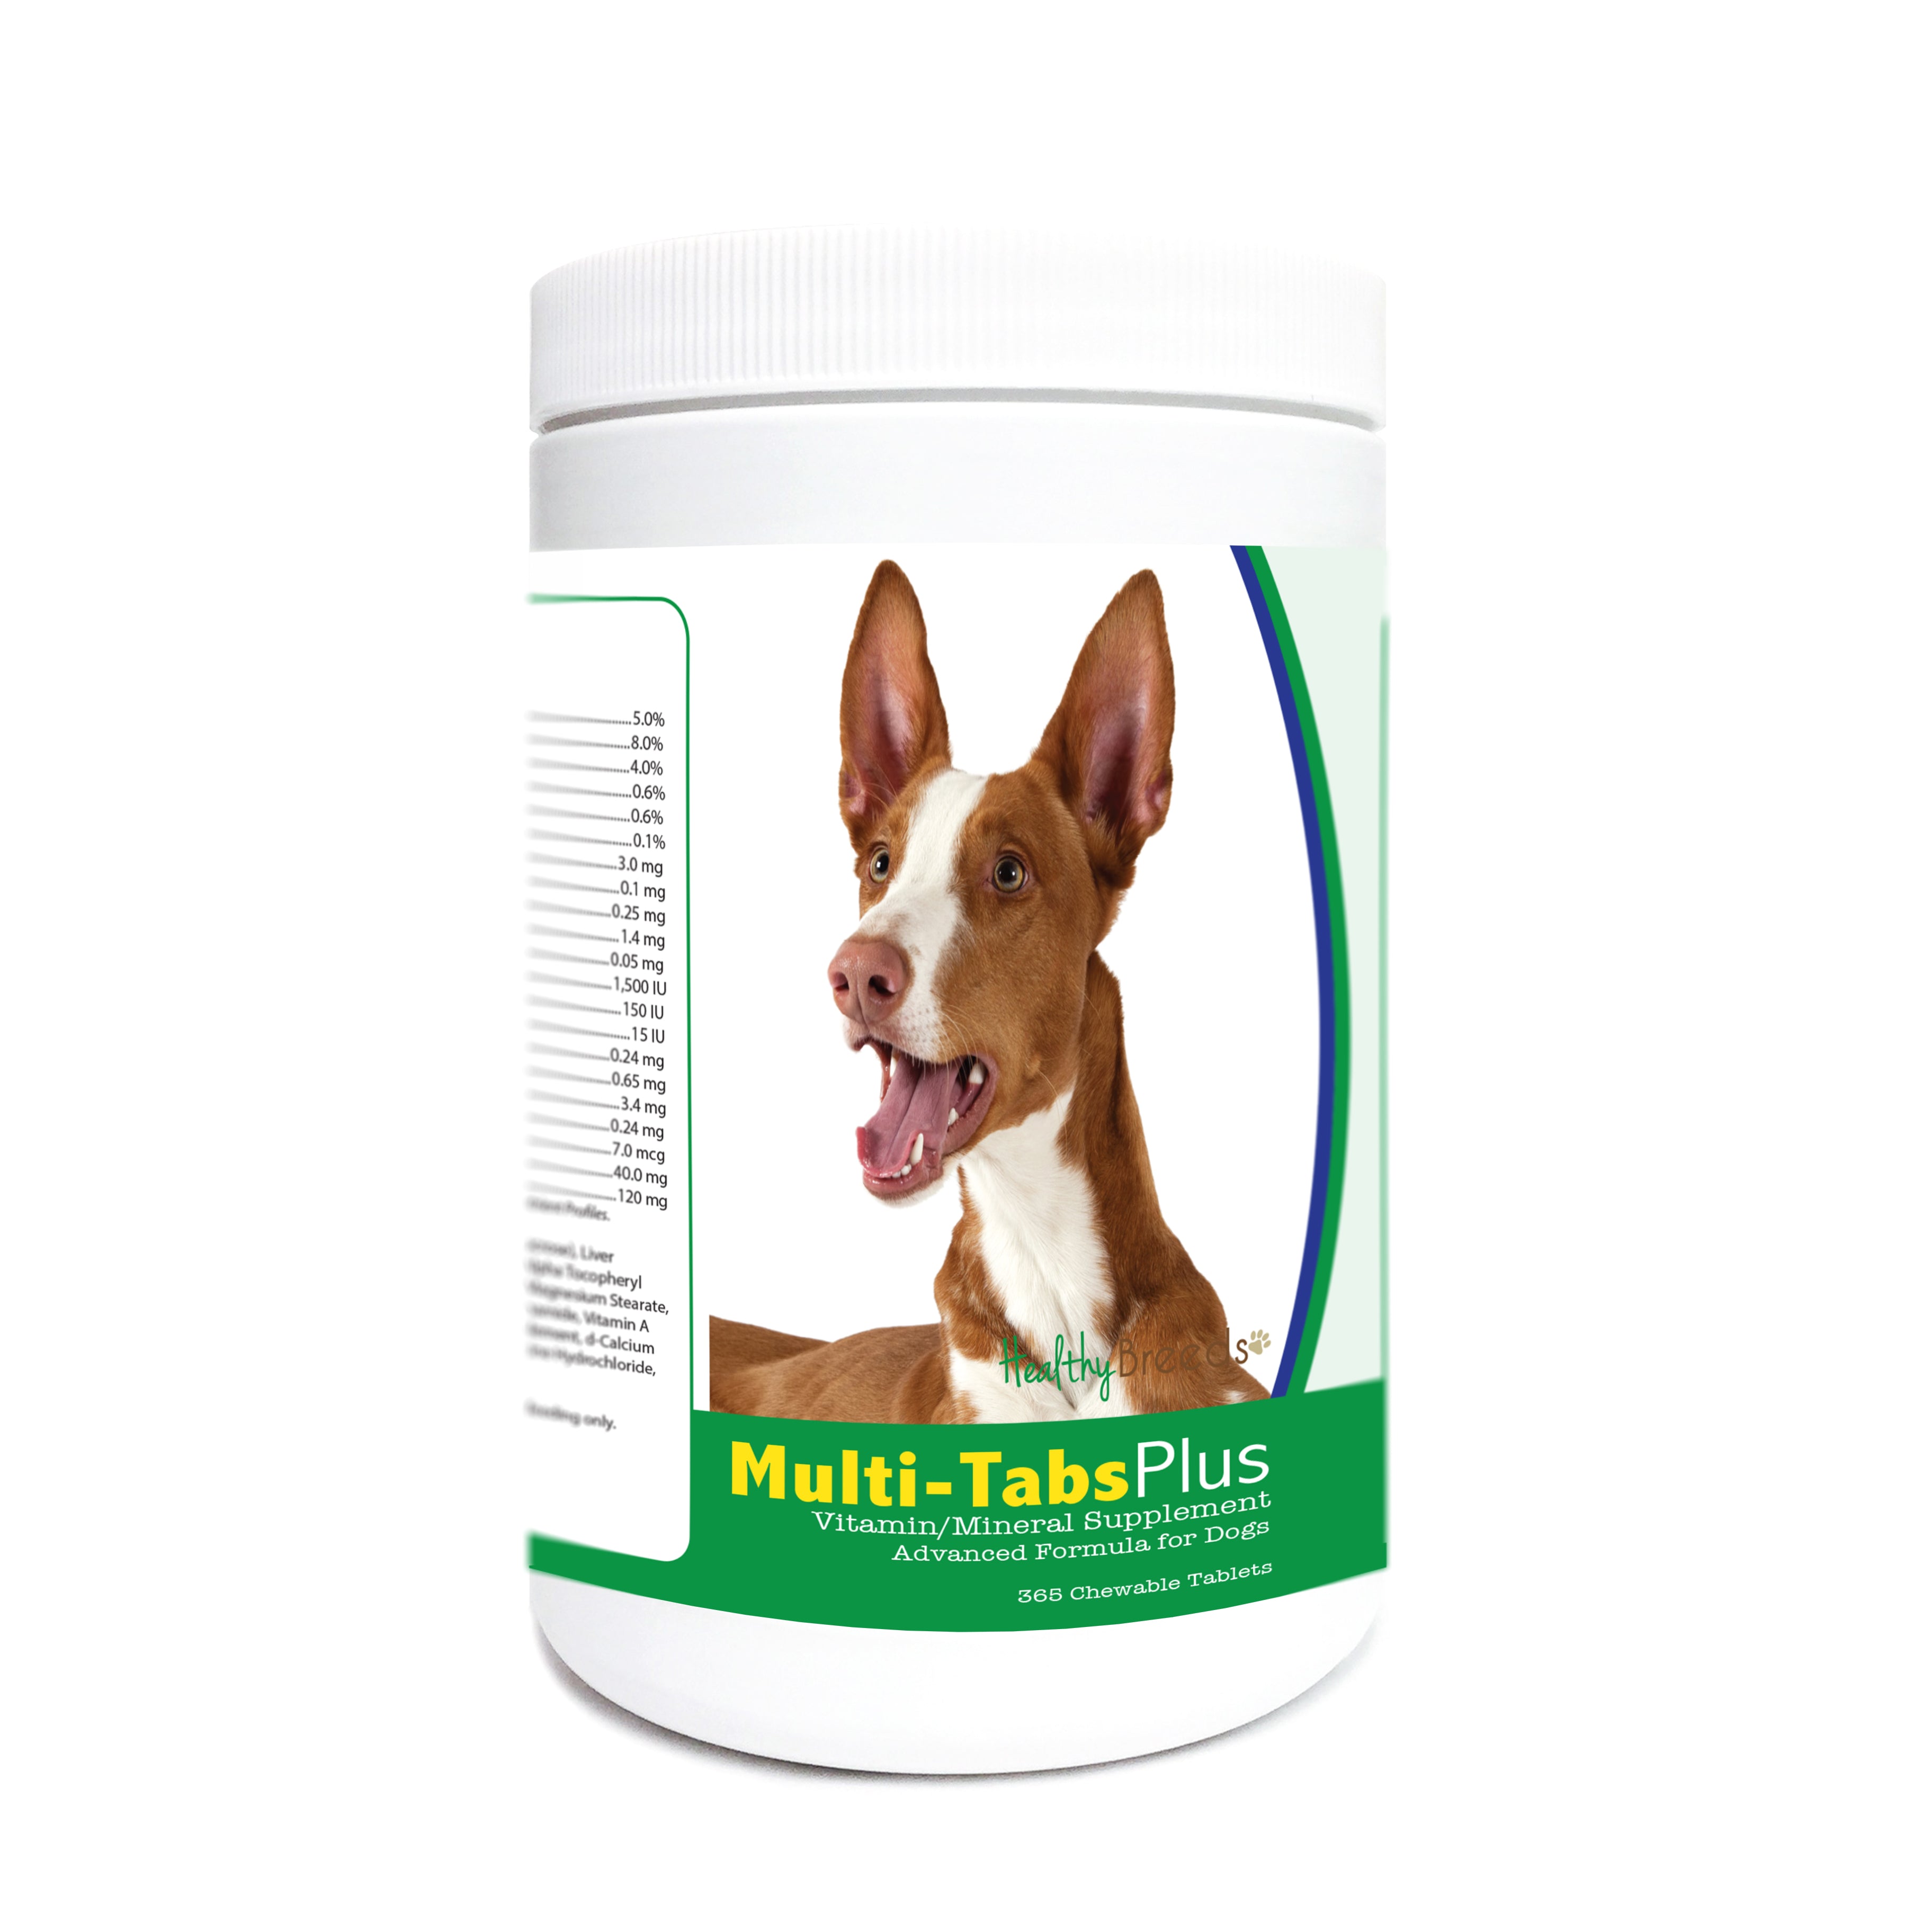 Ibizan Hound Multi-Tabs Plus Chewable Tablets 365 Count